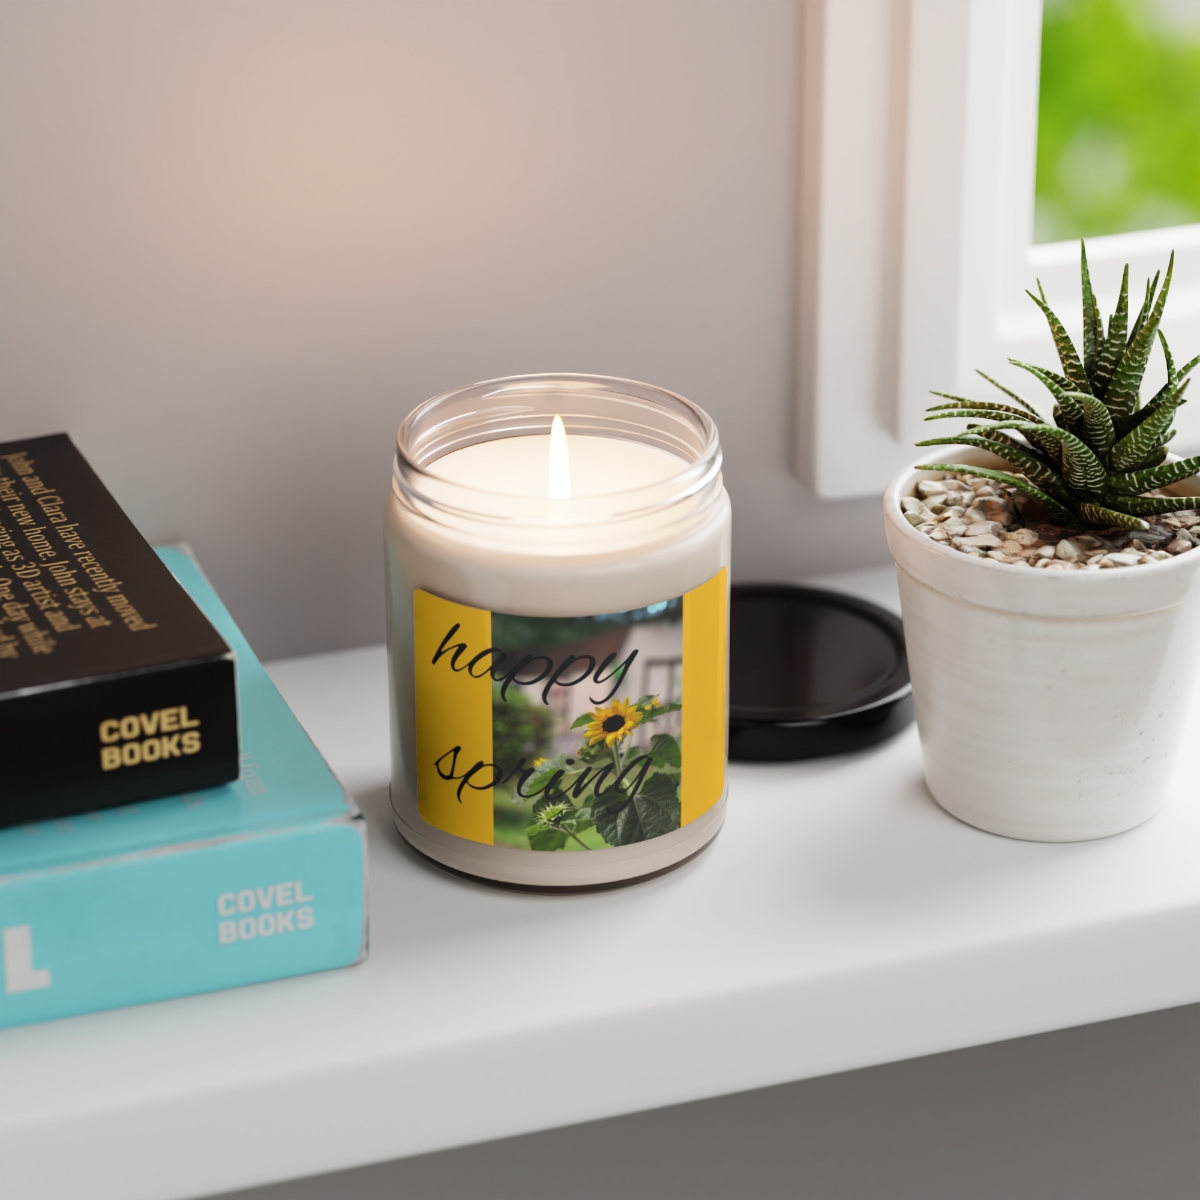 Light up the spring! Scented Soy Candle, 9oz product thumbnail image